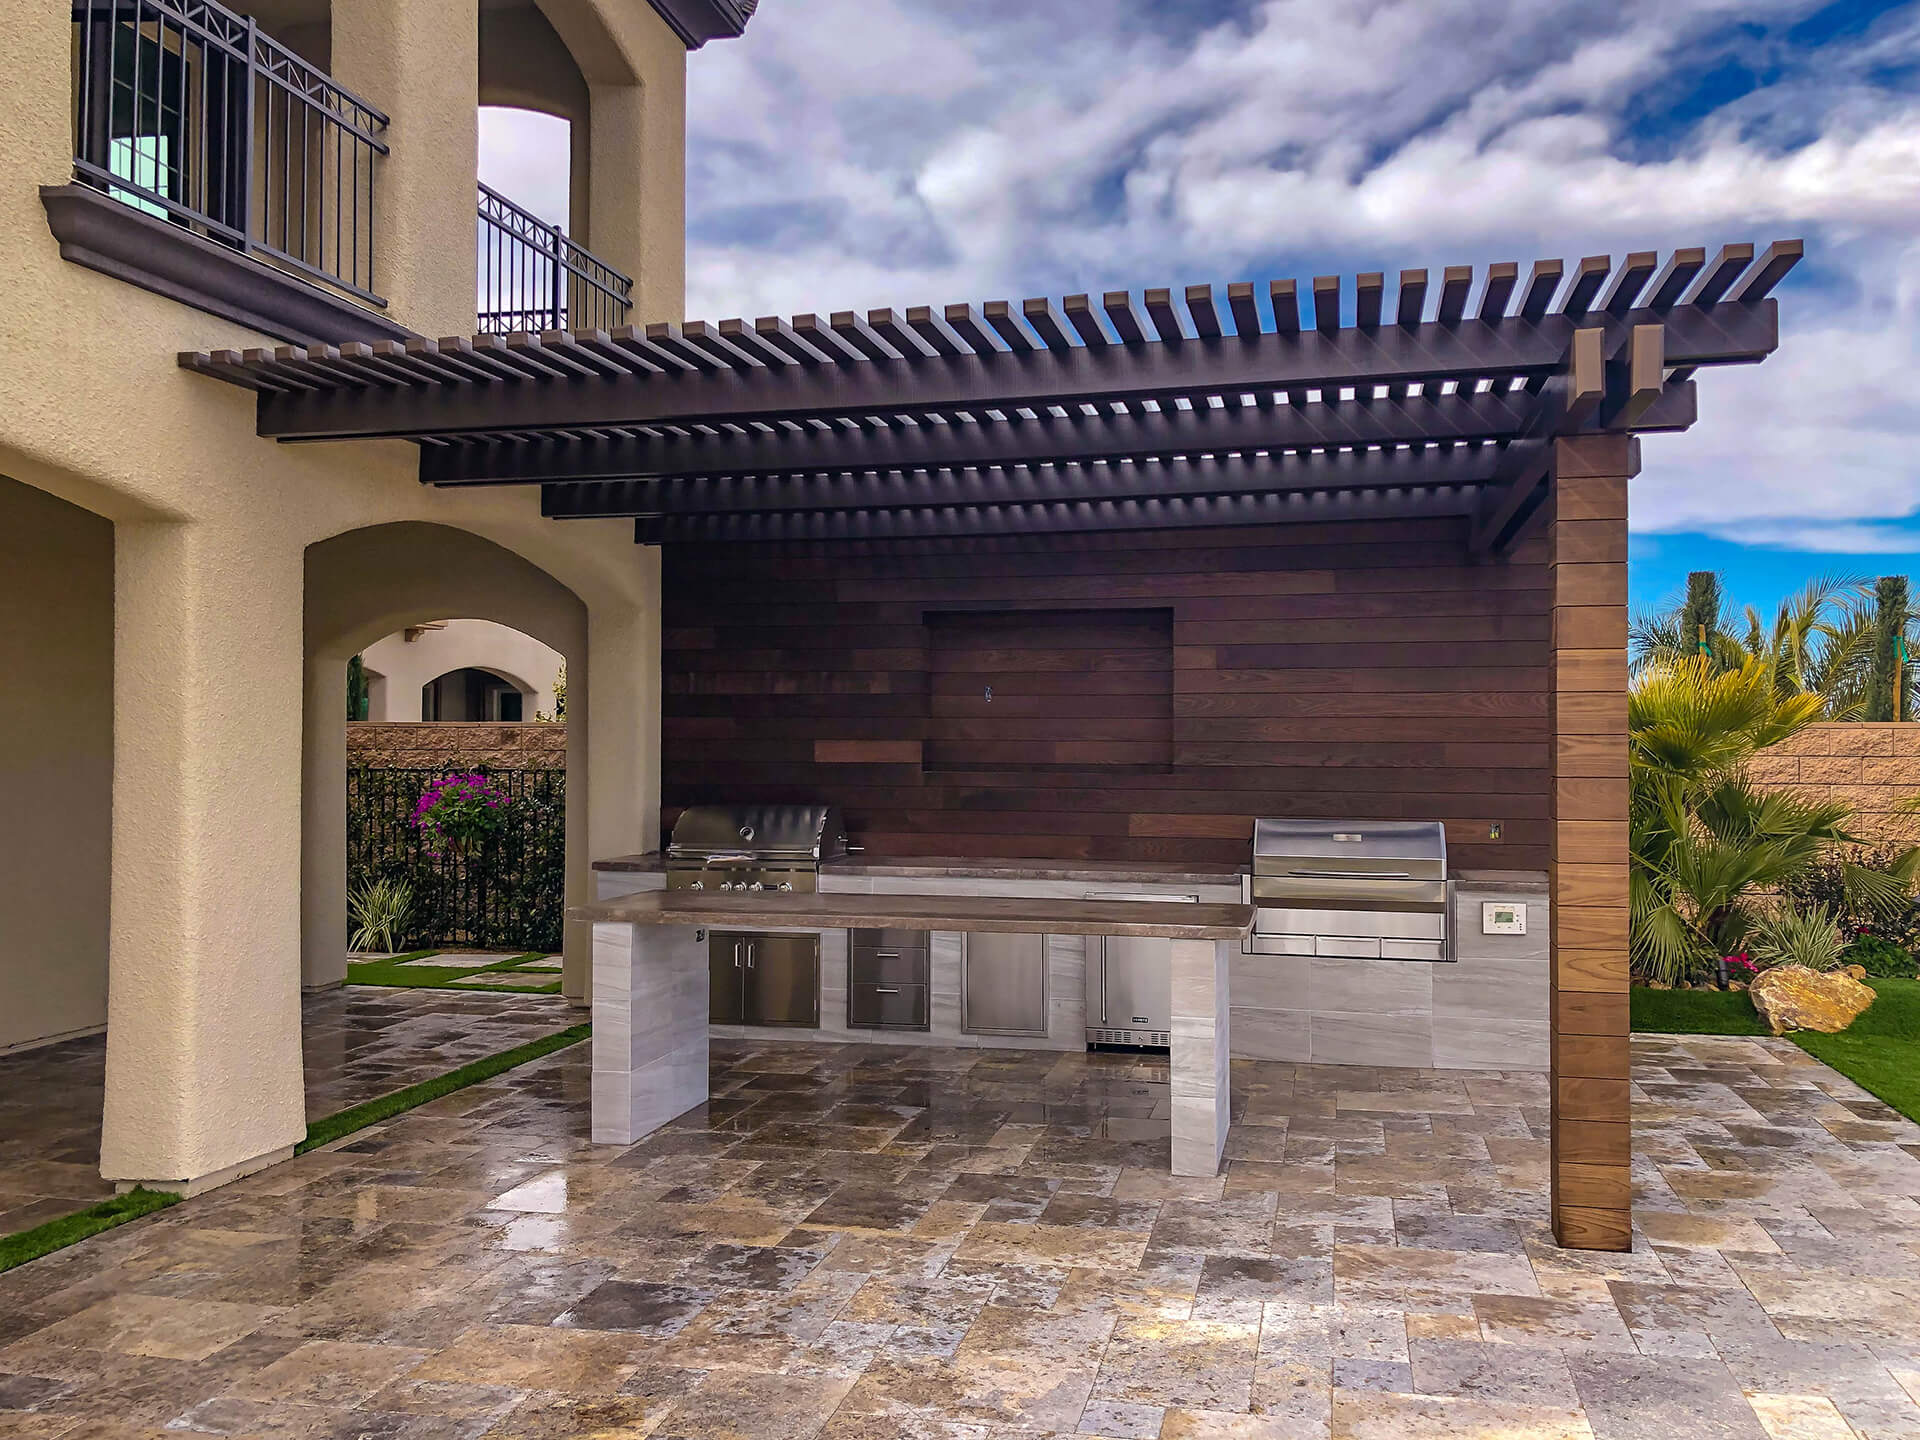 Custom Outdoor Kitchens and Living Area Design Contractor of Las Vegas, Nevada